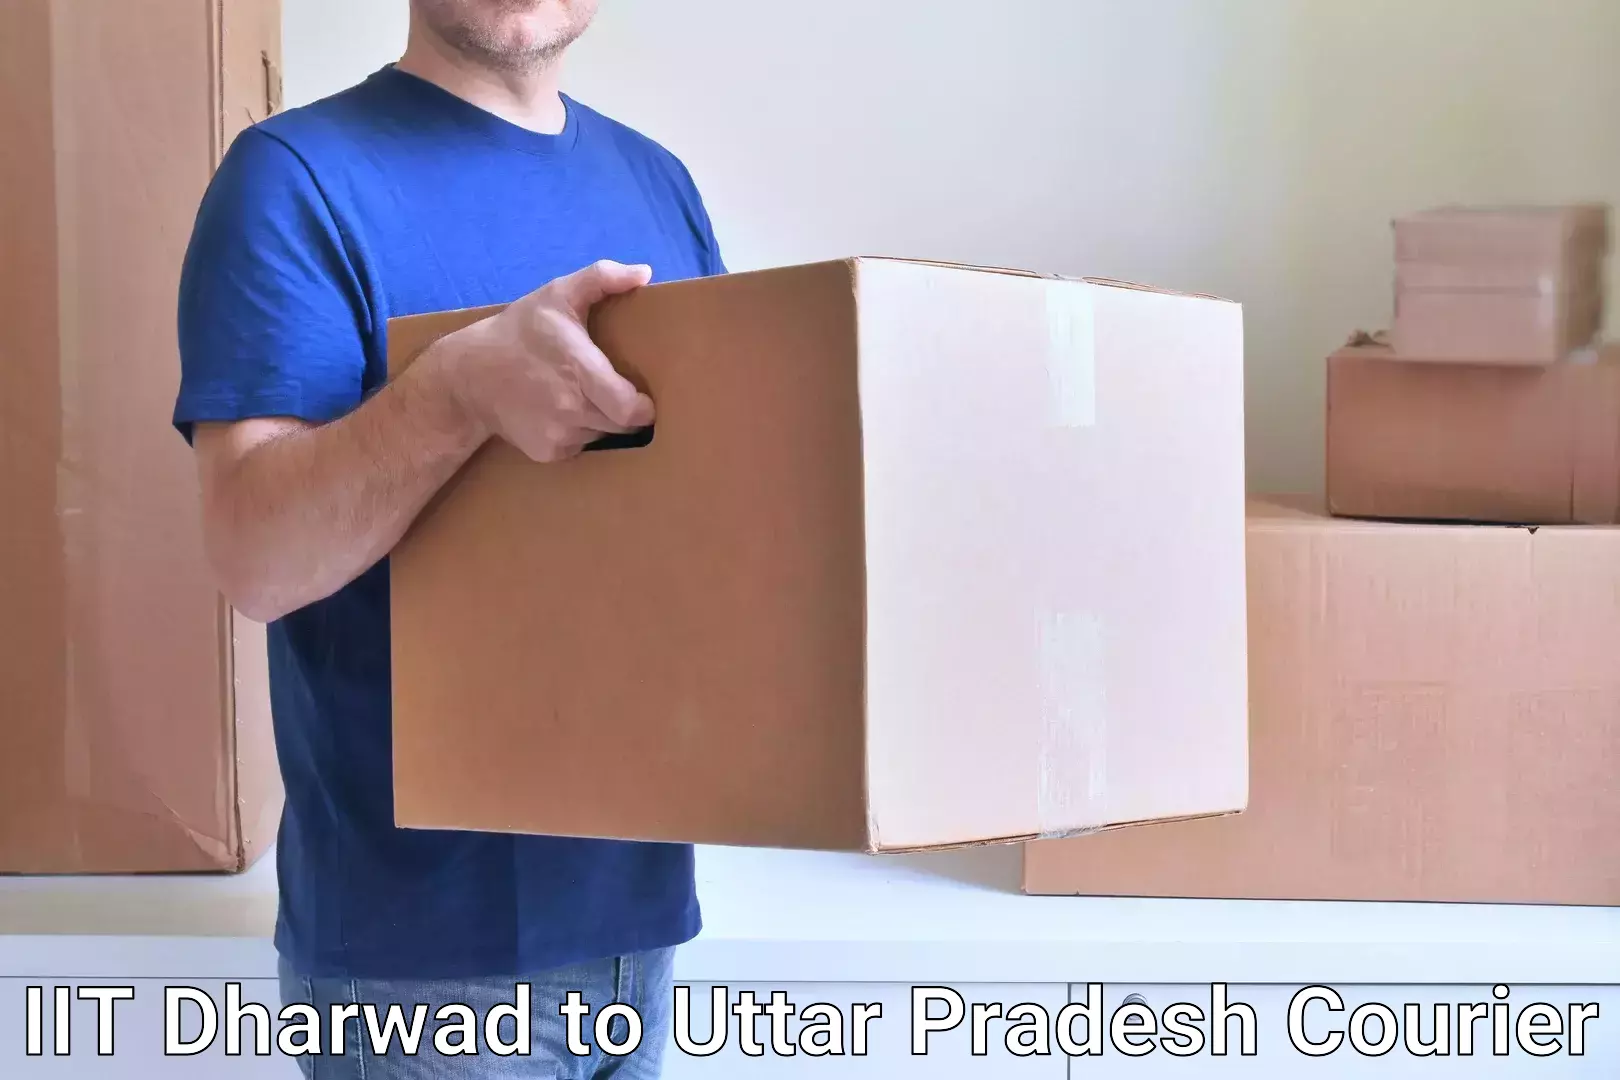 Customer-friendly courier services IIT Dharwad to Akbarpur